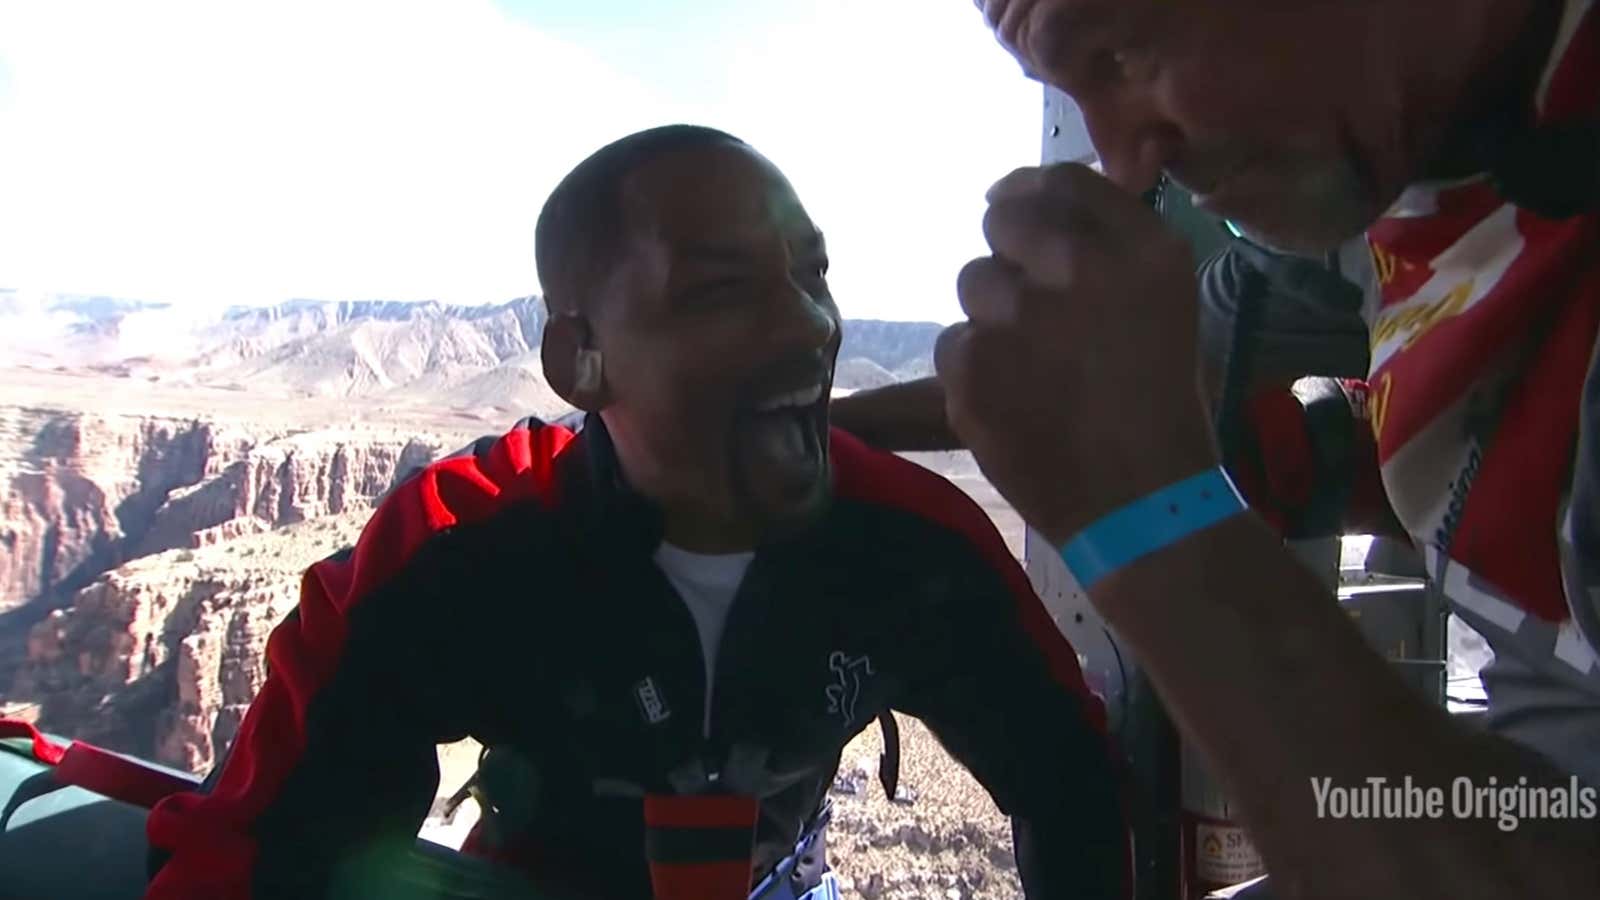 Will Smith spent his 50th birthday jumping out of an airplane on YouTube.